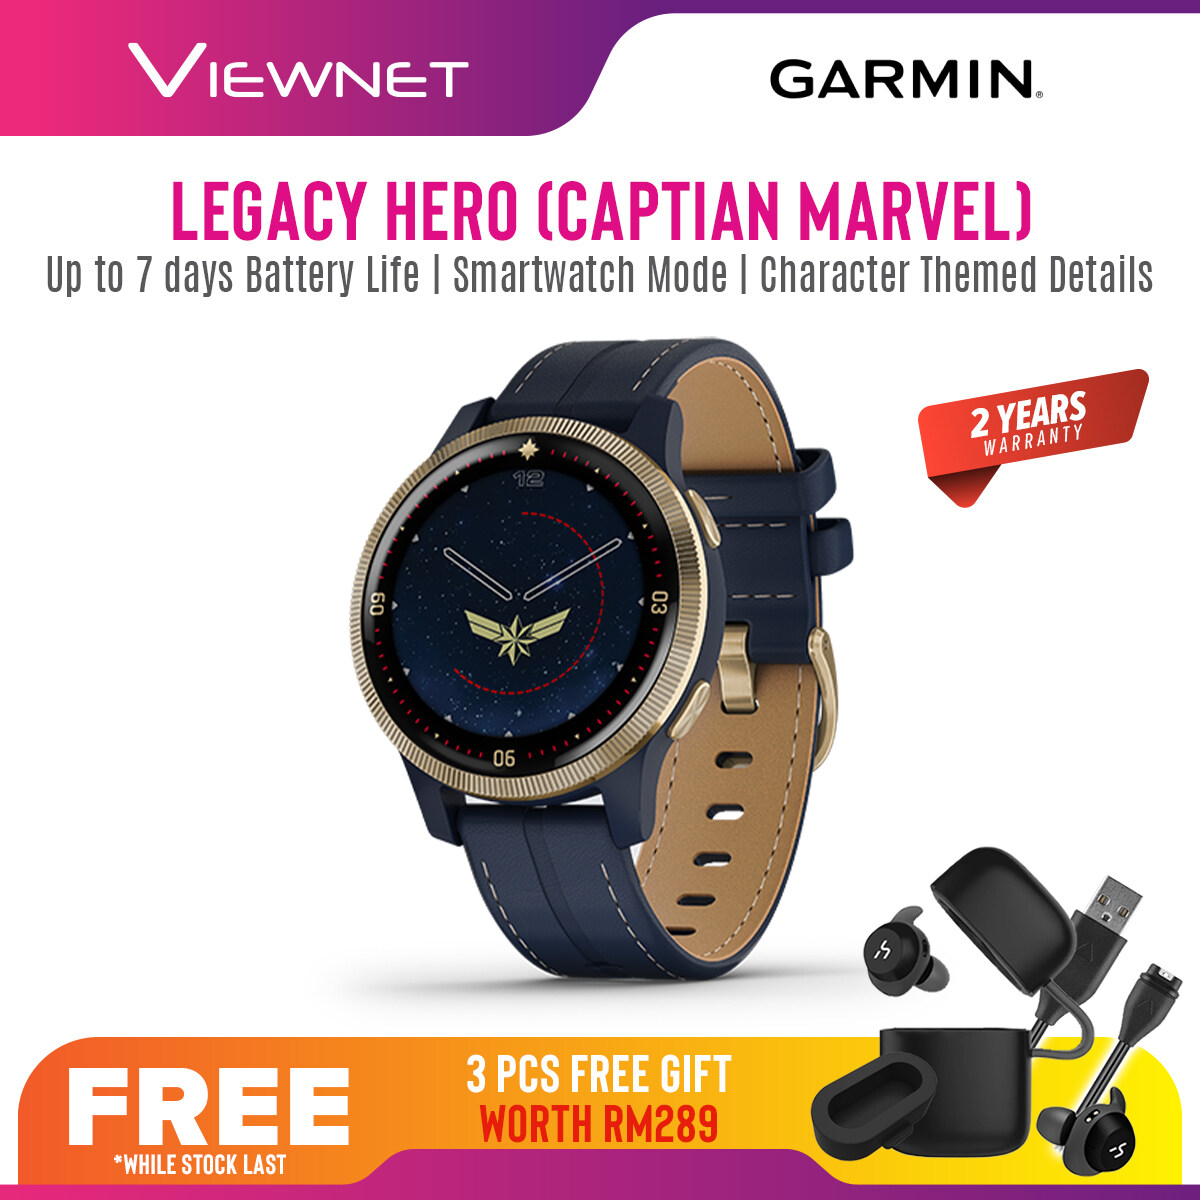 (Special Edition) Garmin Legacy Hero Series Smartwatch with Character-themed App Experience - Captain Marvel / First Avenger